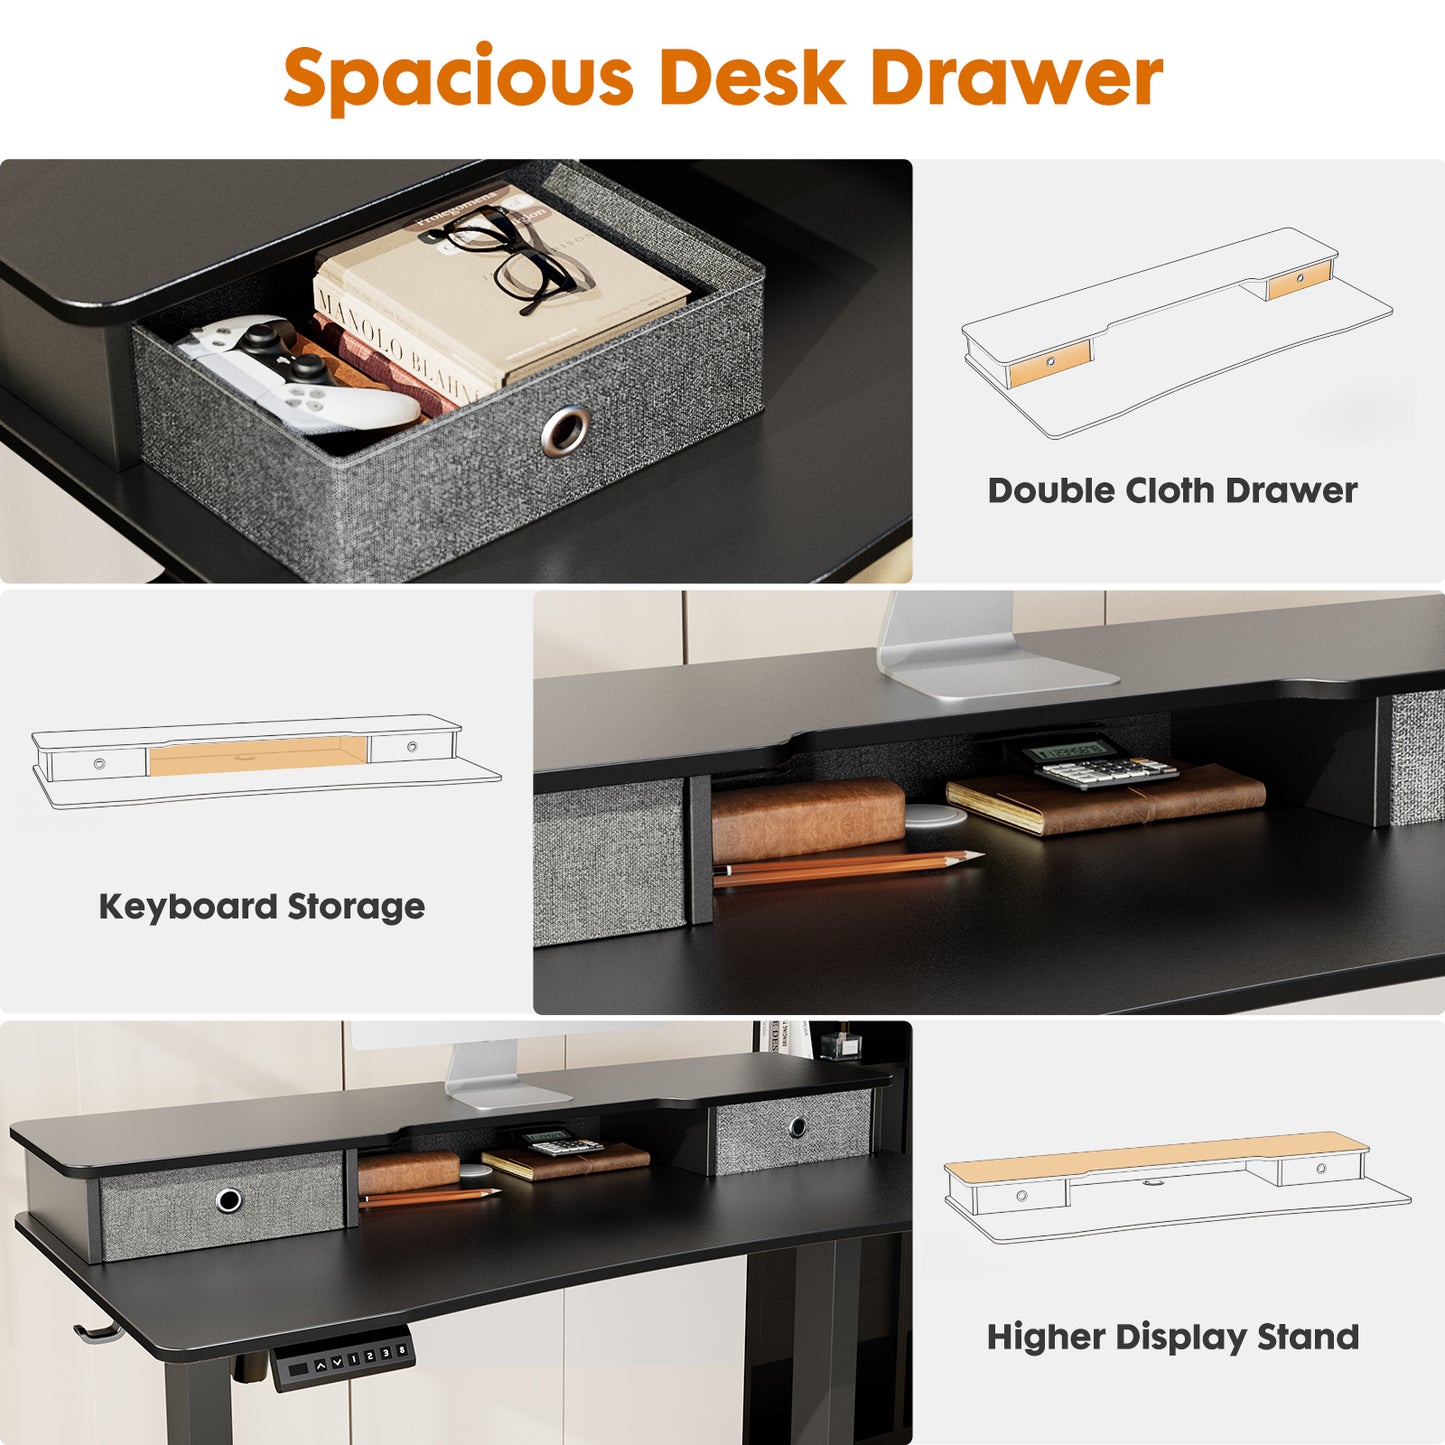 Ergonomic Electric Sit-Stand Desk with Storage and Double Drawers by Sweetcrispy